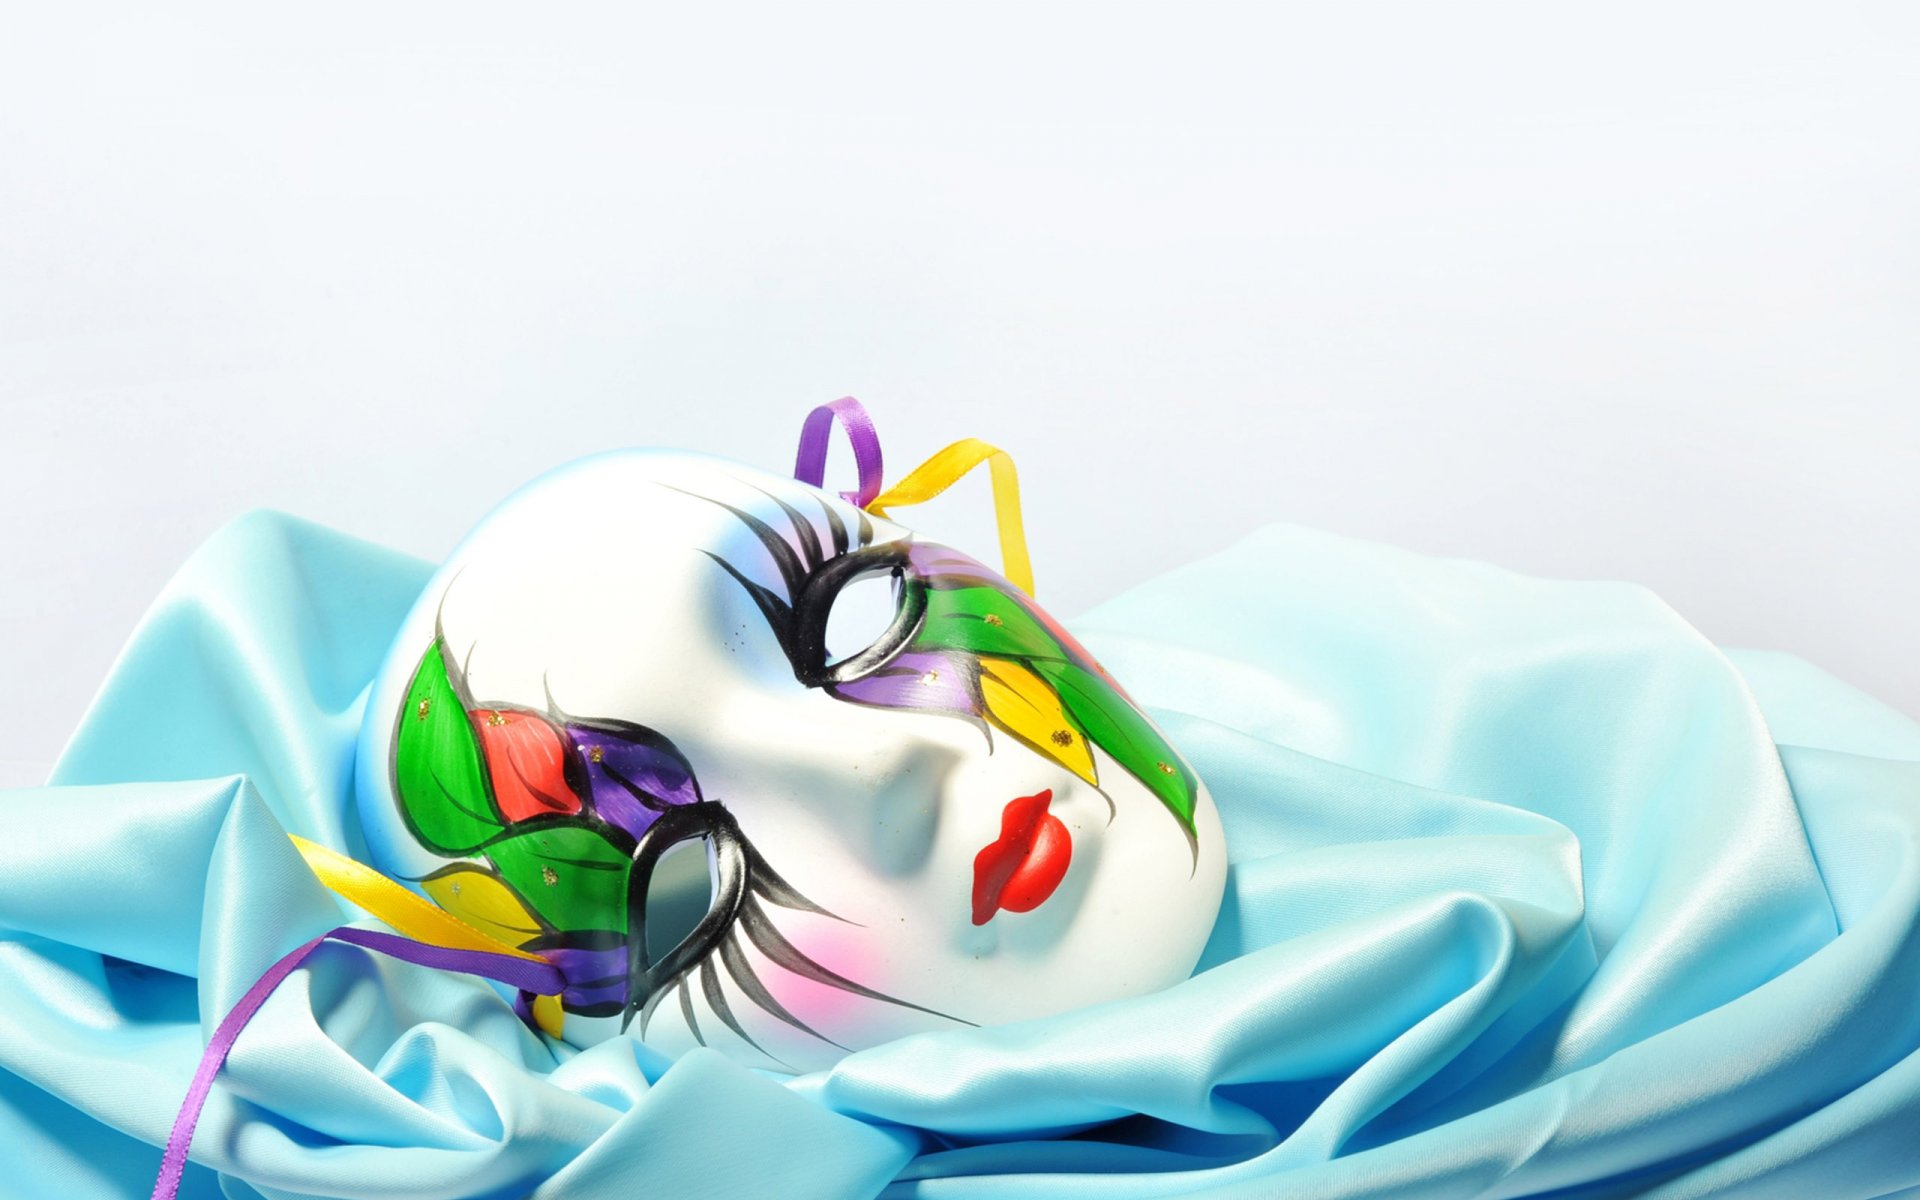 Cool Mask For Kids   HD Wallpapers Widescreen   1920x1200